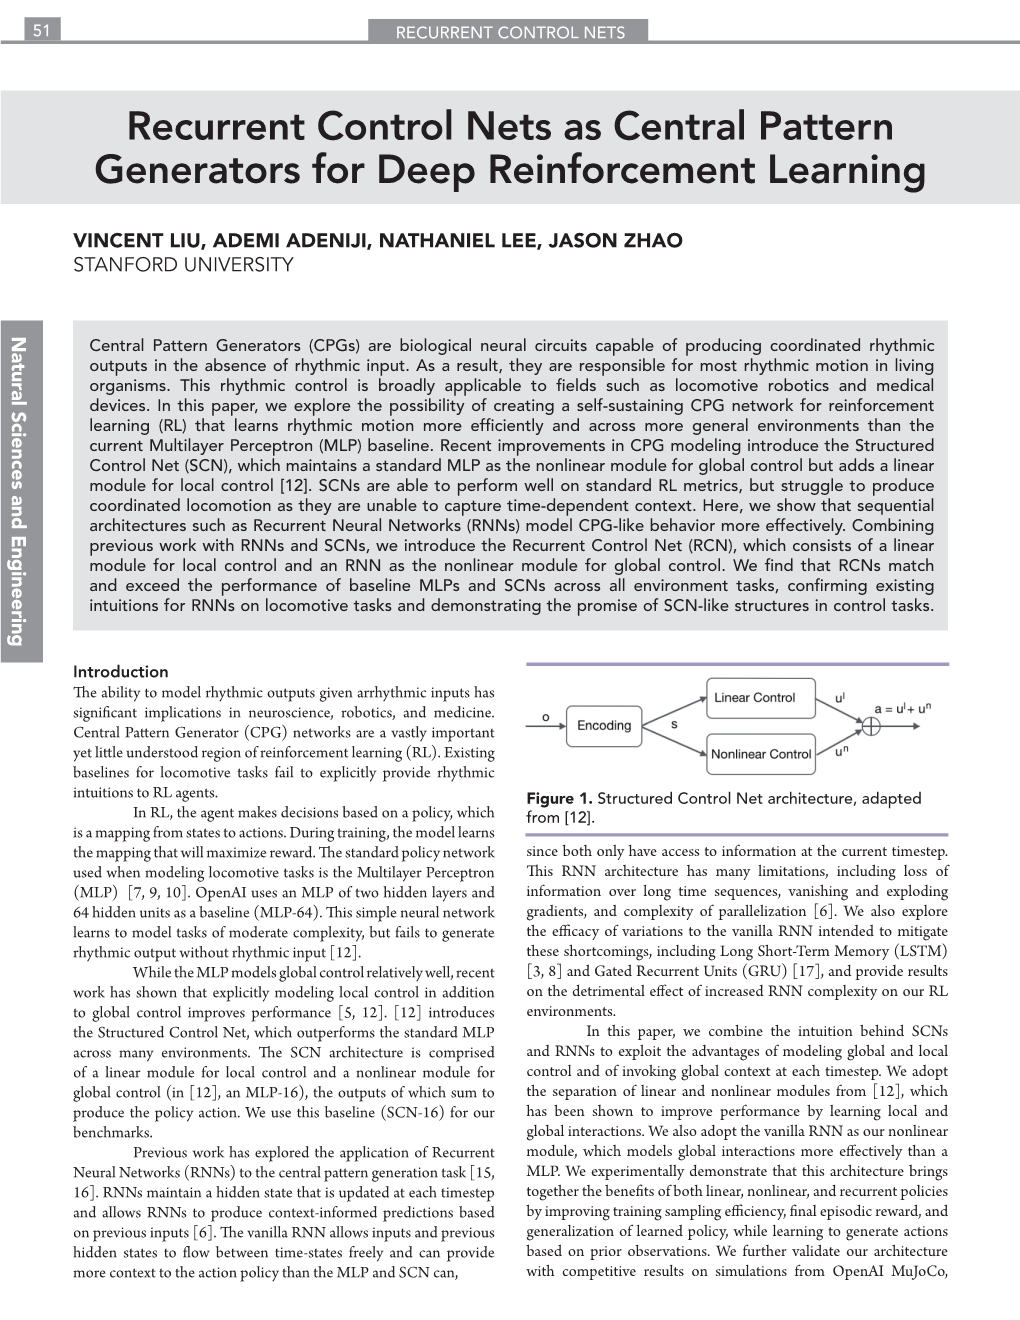 Recurrent Control Nets As Central Pattern Generators for Deep Reinforcement Learning